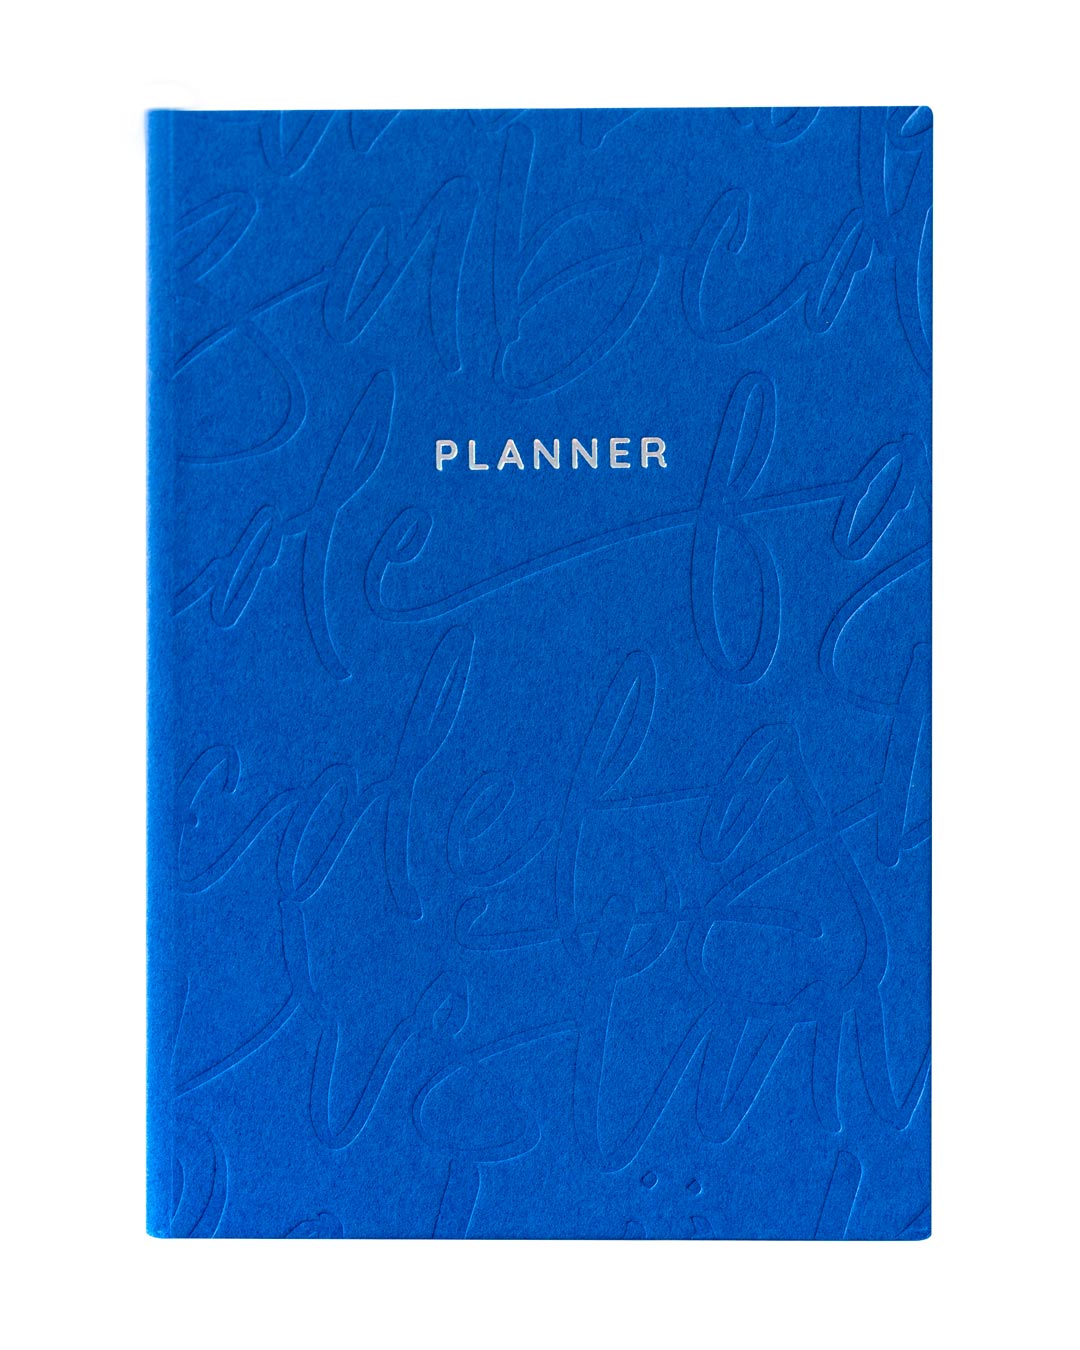 Blue Calligraphy Planner